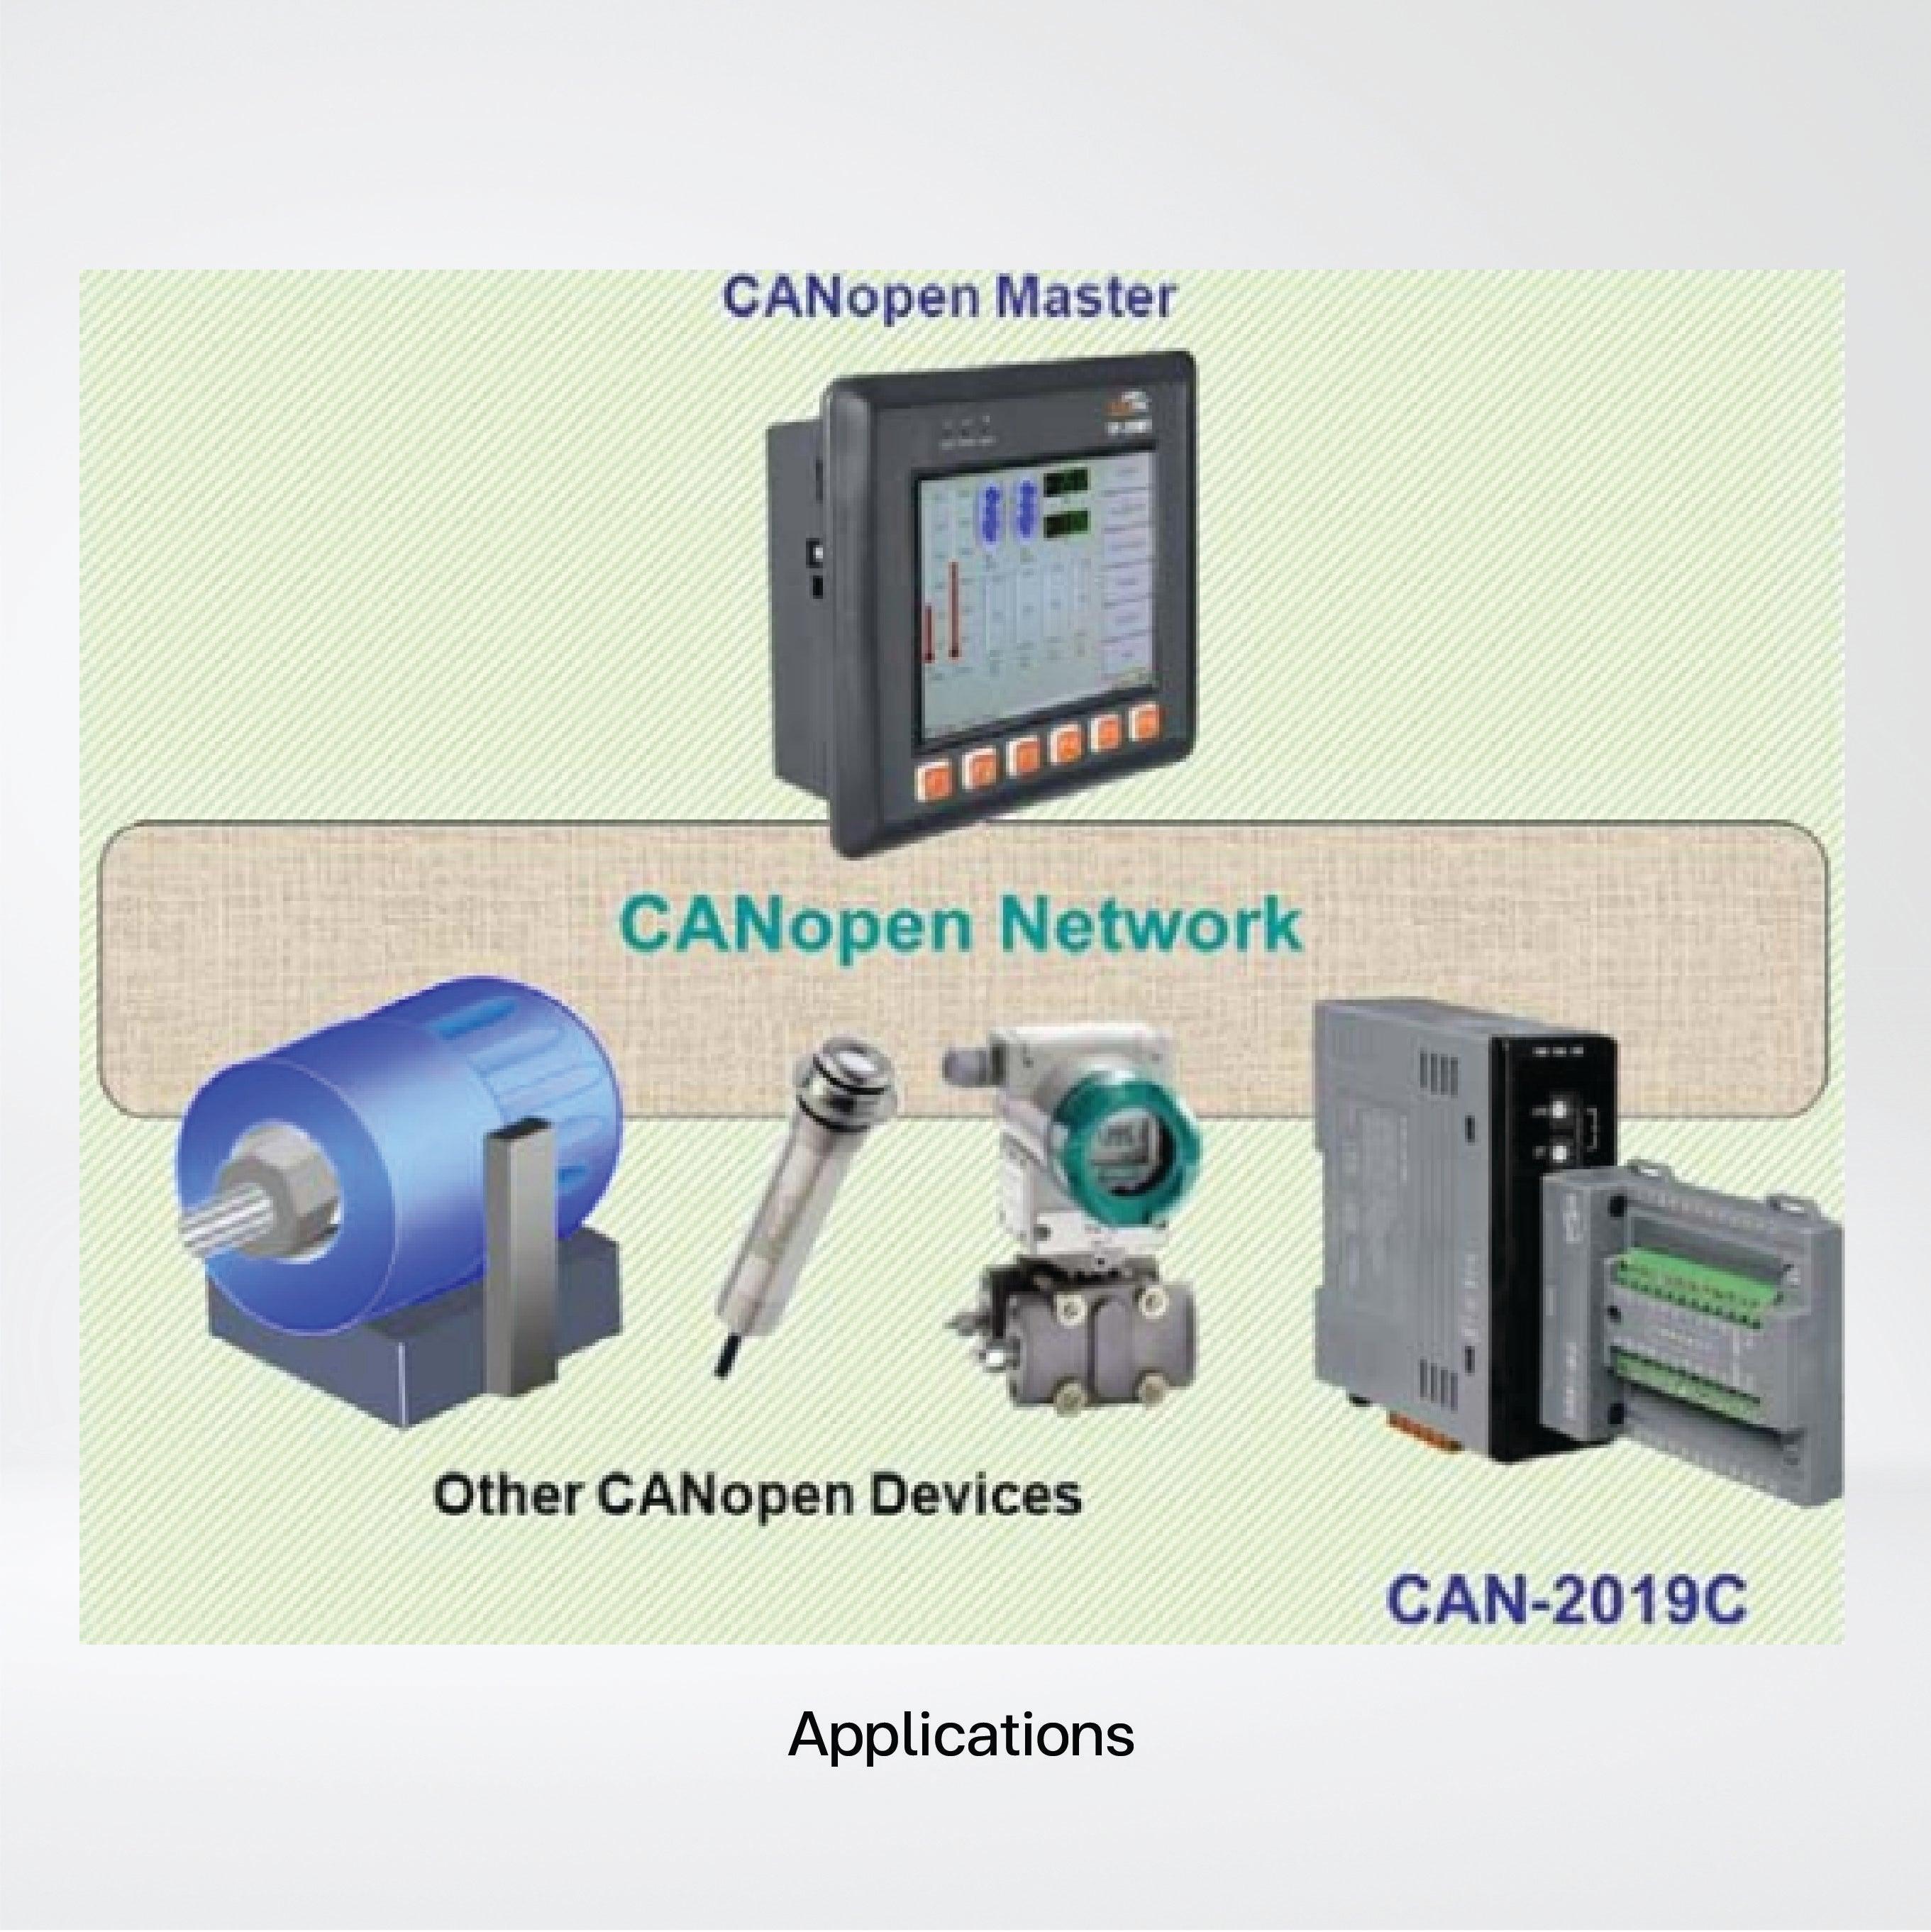 CAN-2019C/S2 CANopen Slave Module of 10-channel Universal AI - Riverplus